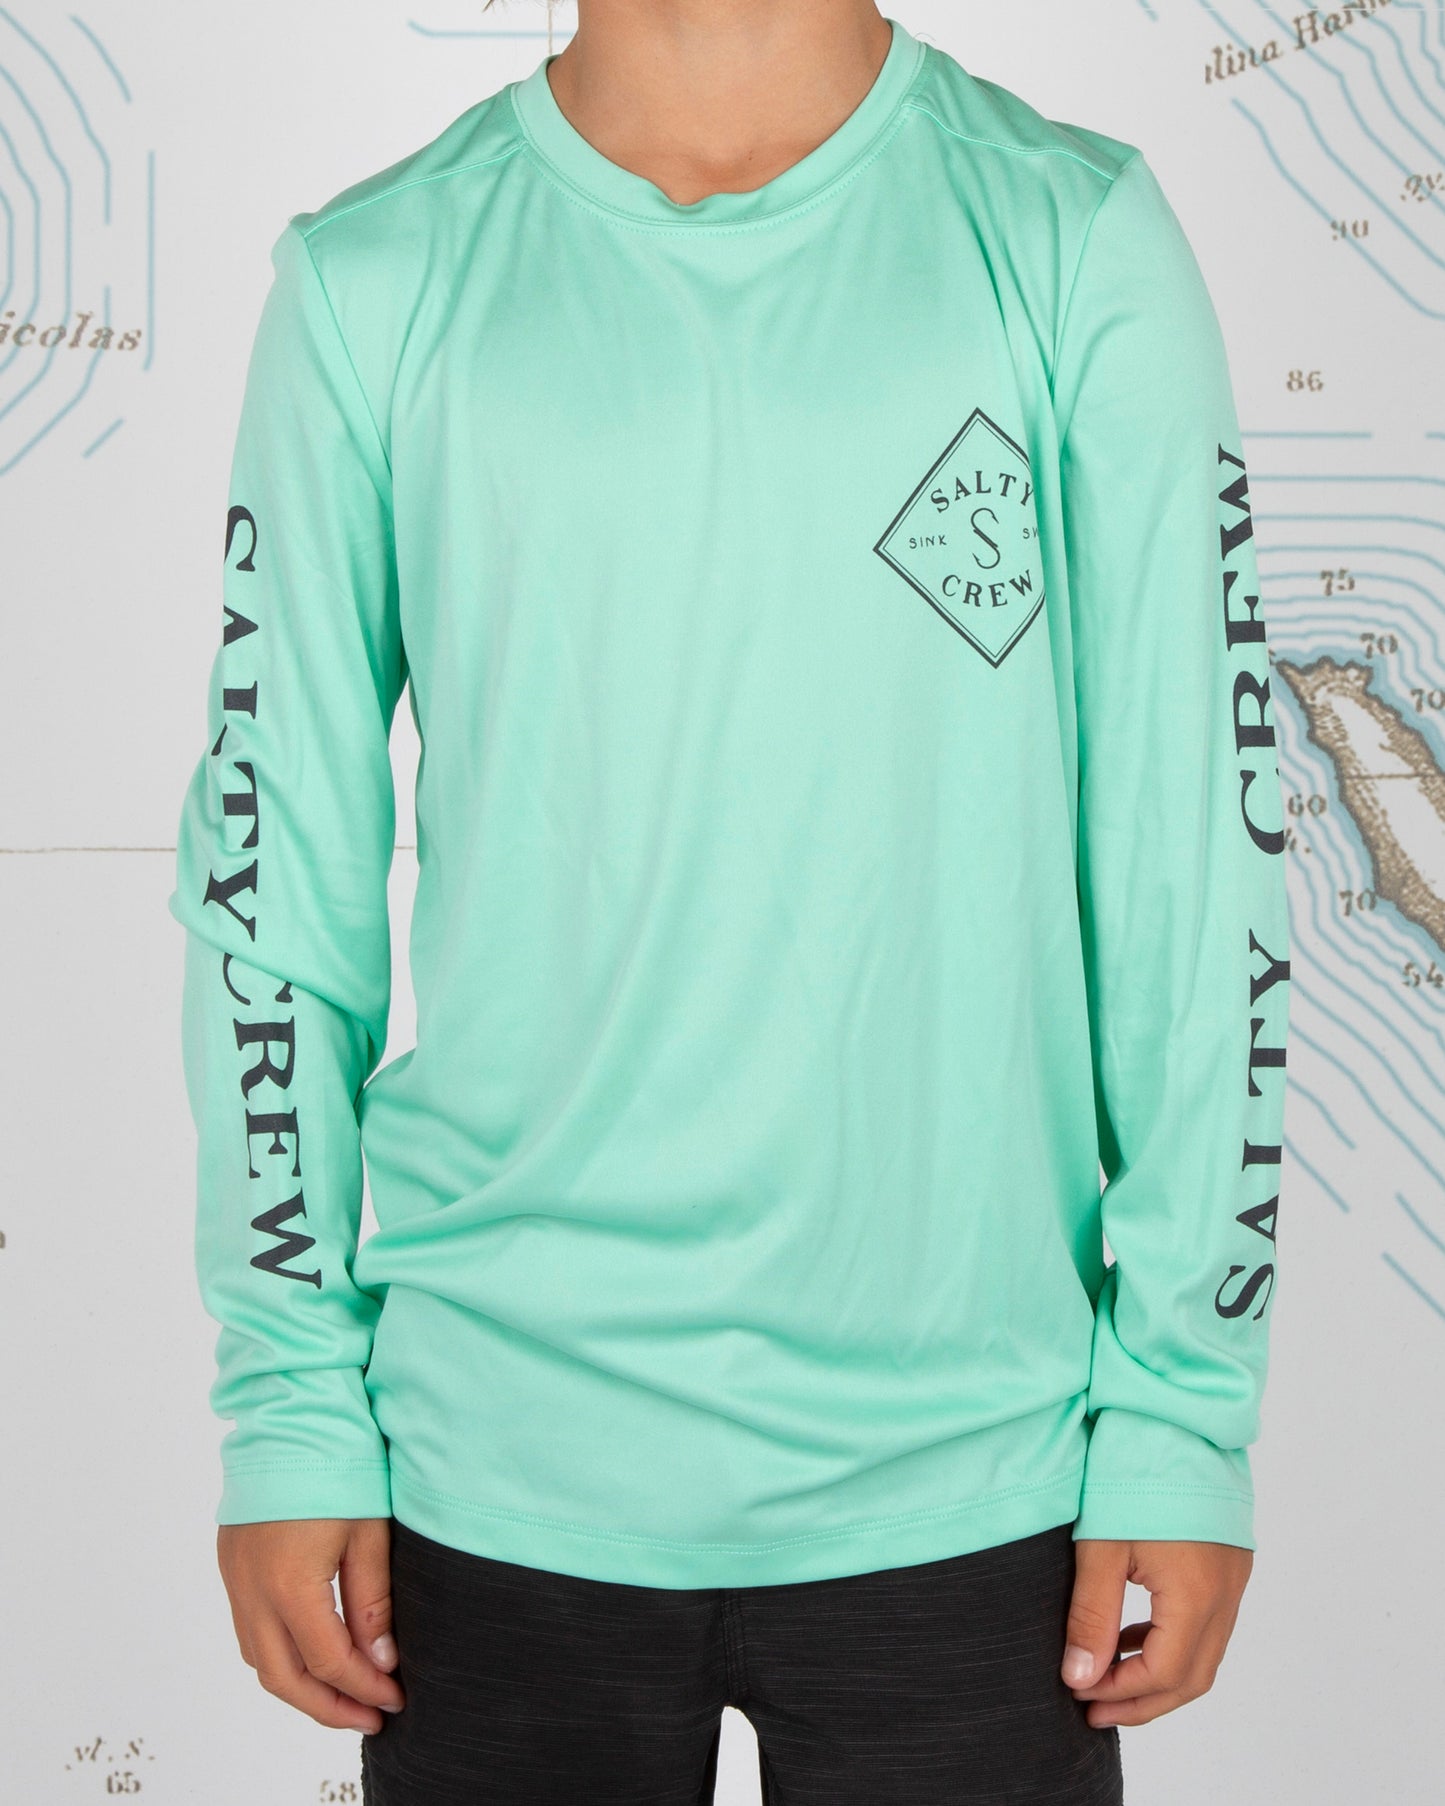 On body front of Tippet Boys Seafoam L/S Sunshirt